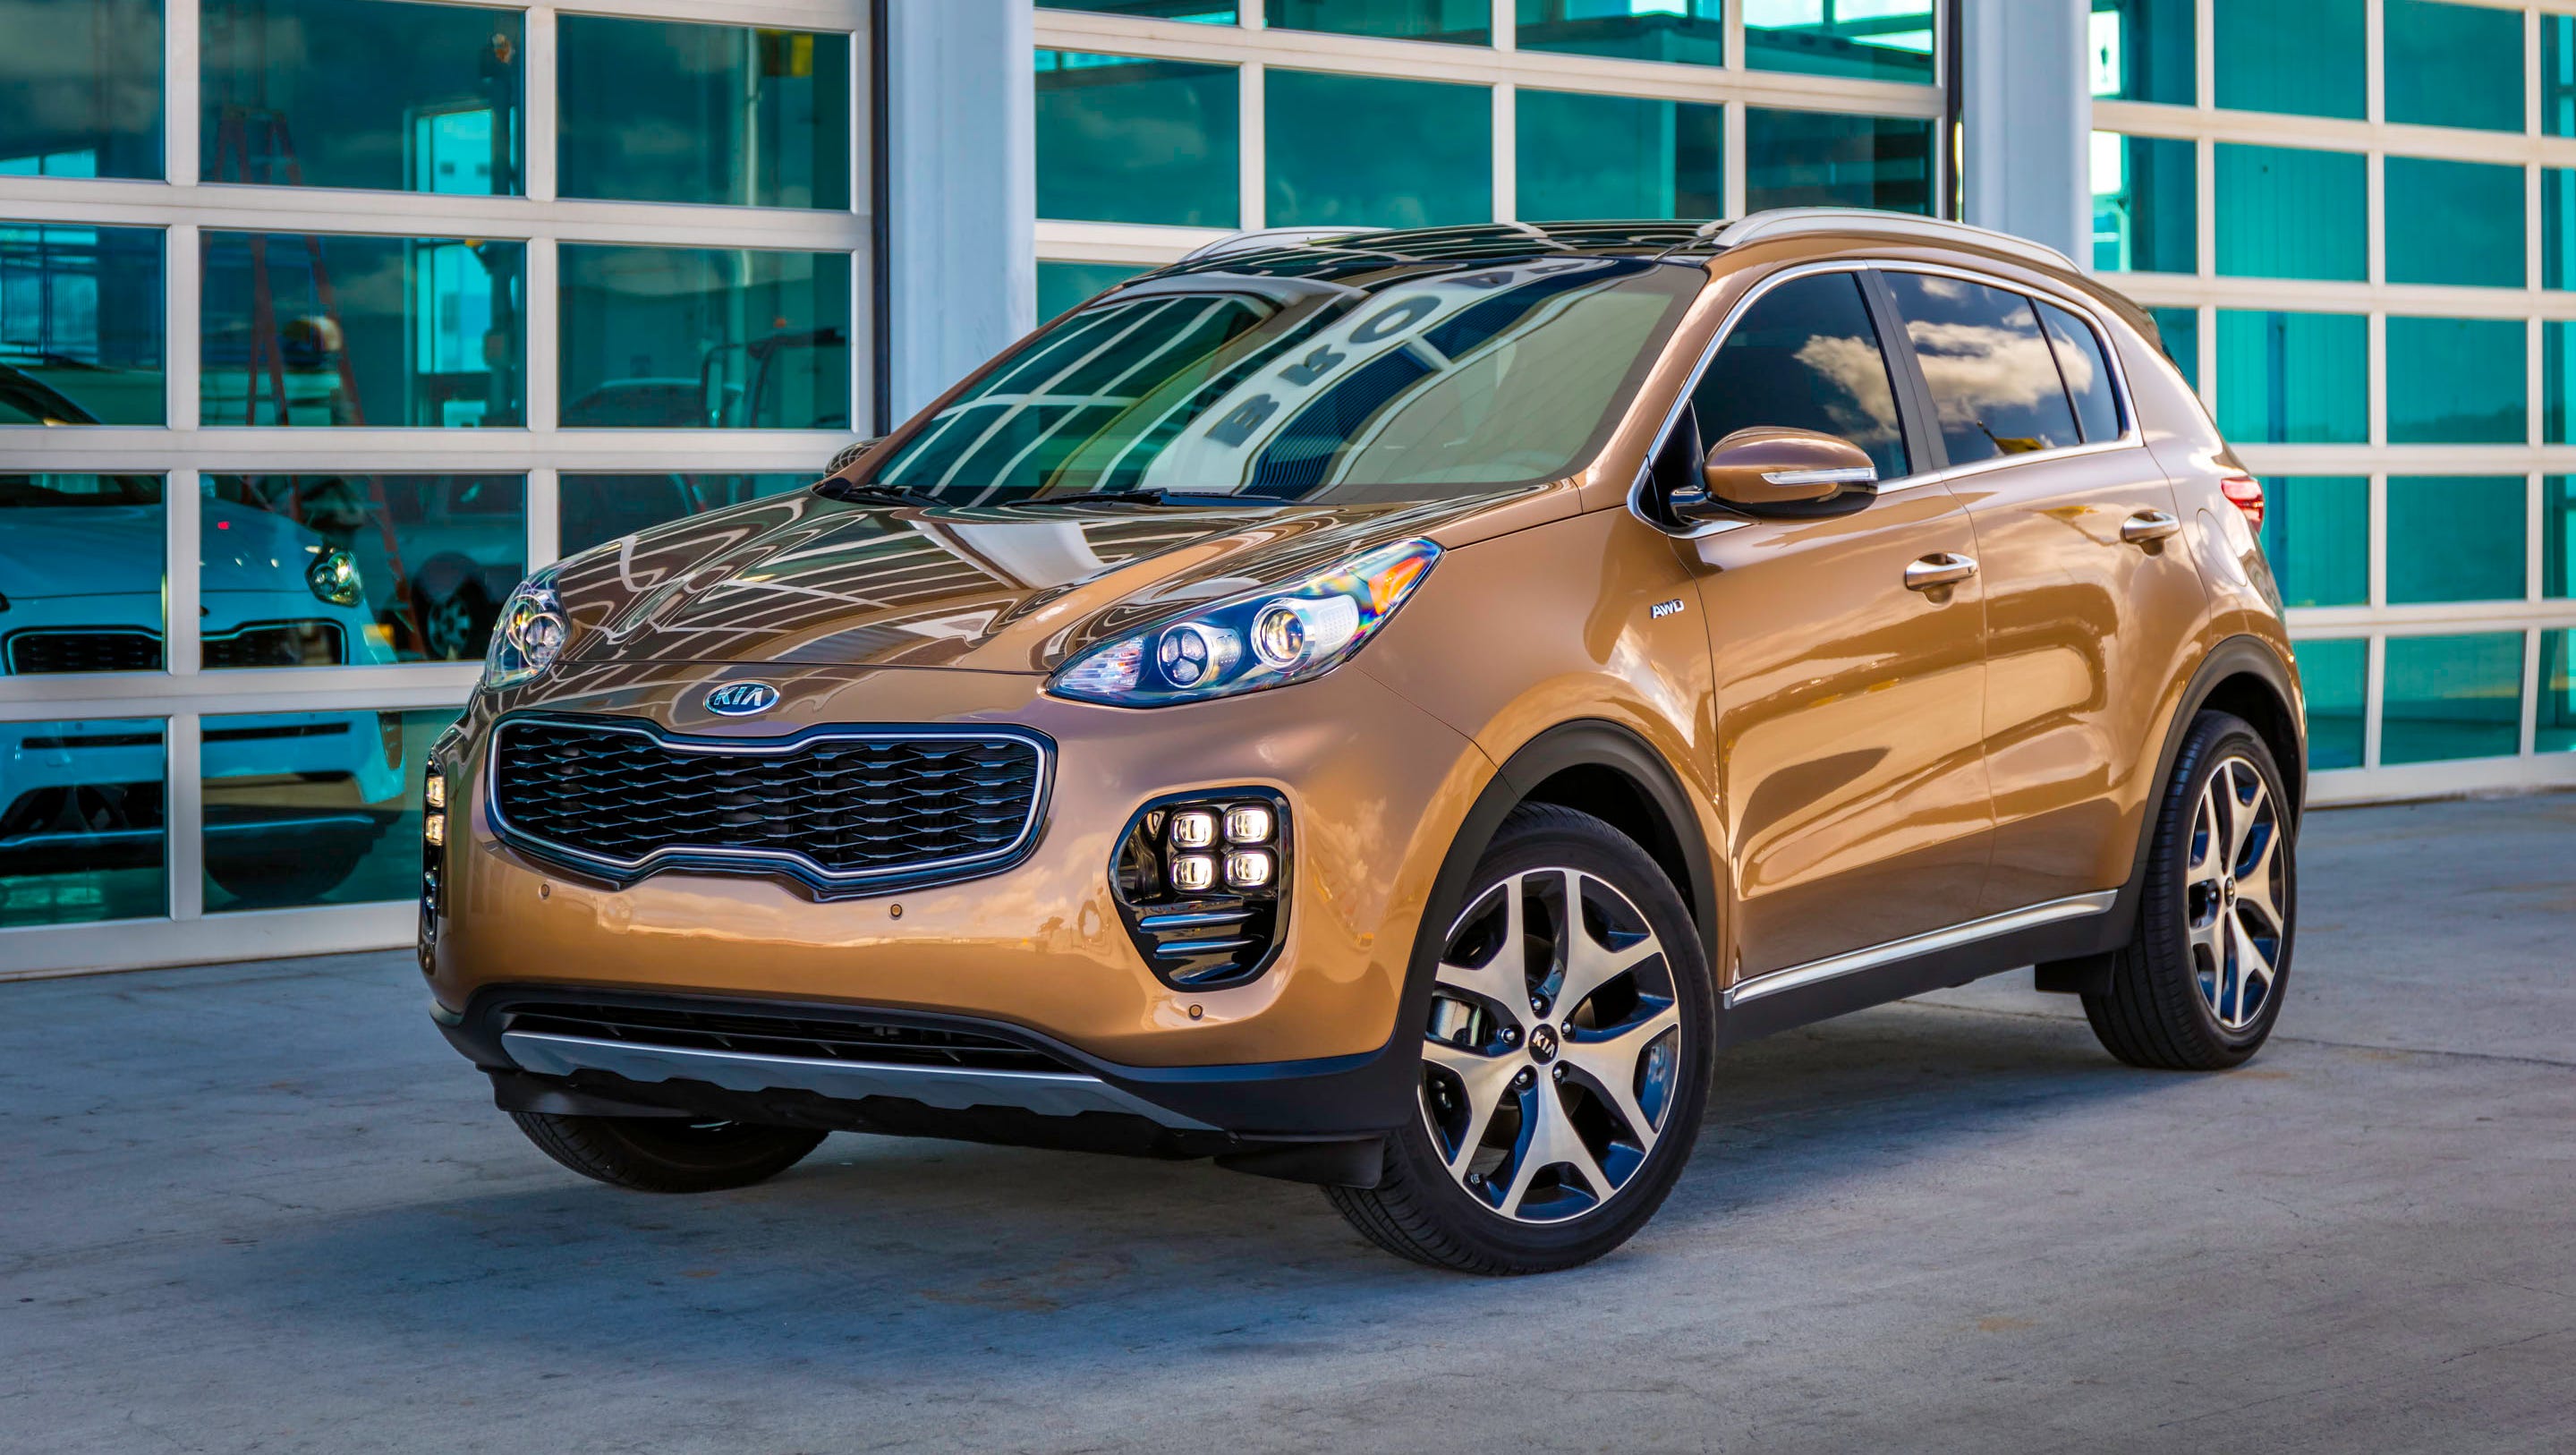 Review: 2017 Kia Sportage adds flash to compact SUV